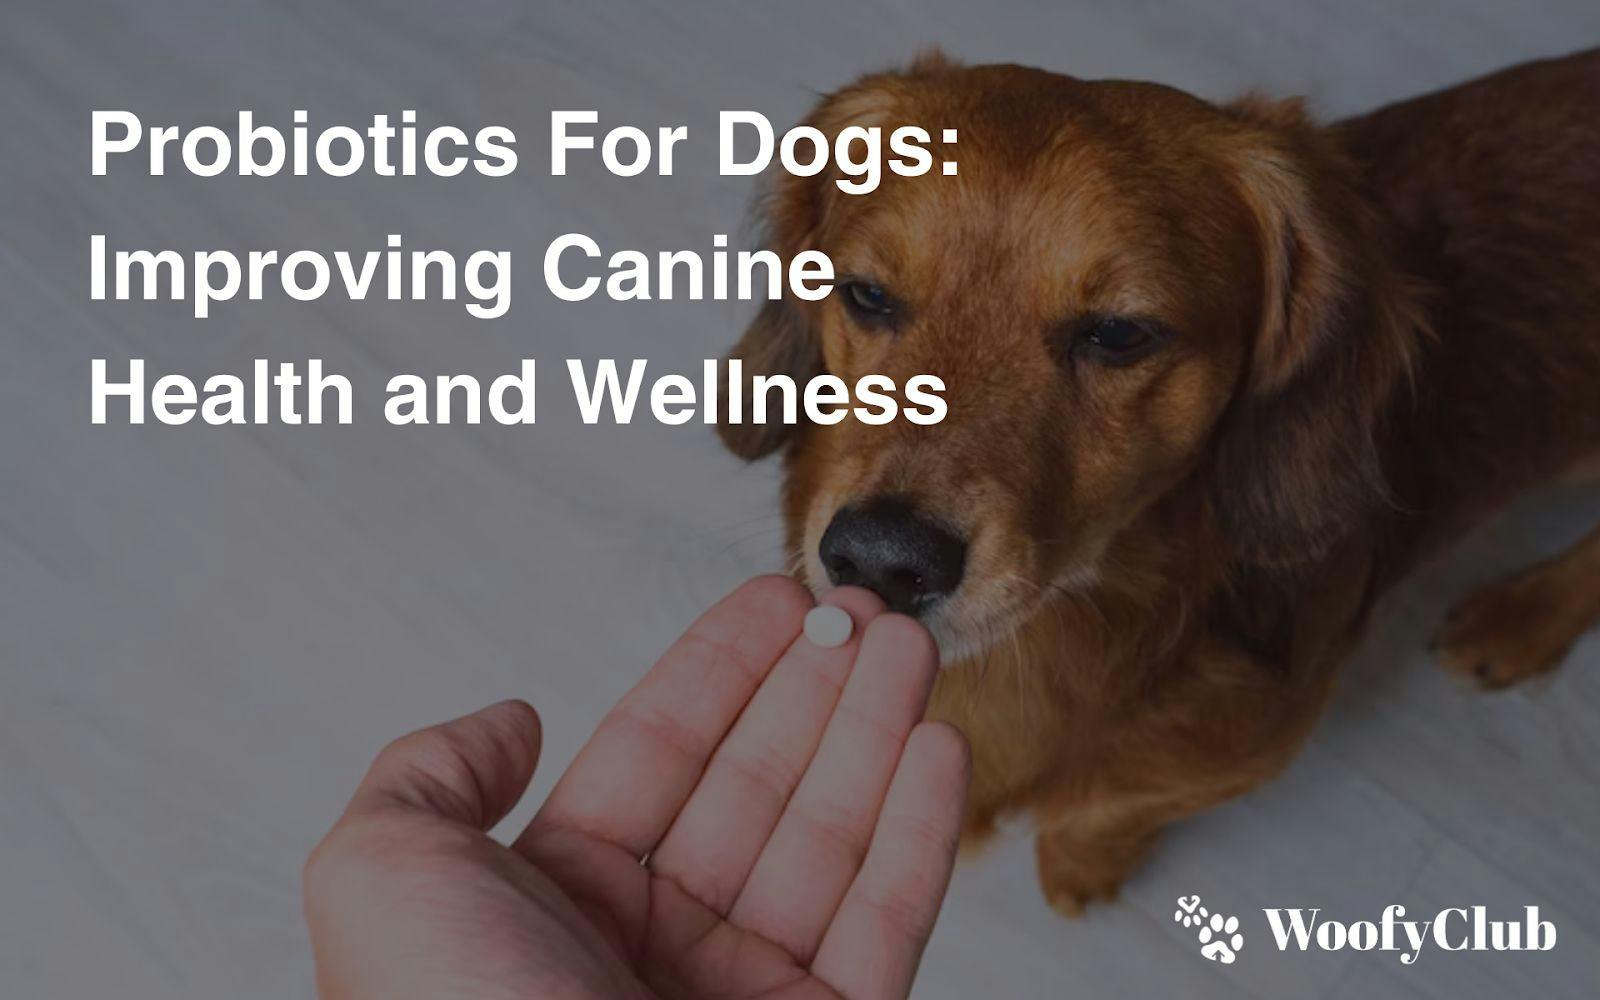 Probiotics For Dogs: Improving Canine Health And Wellness